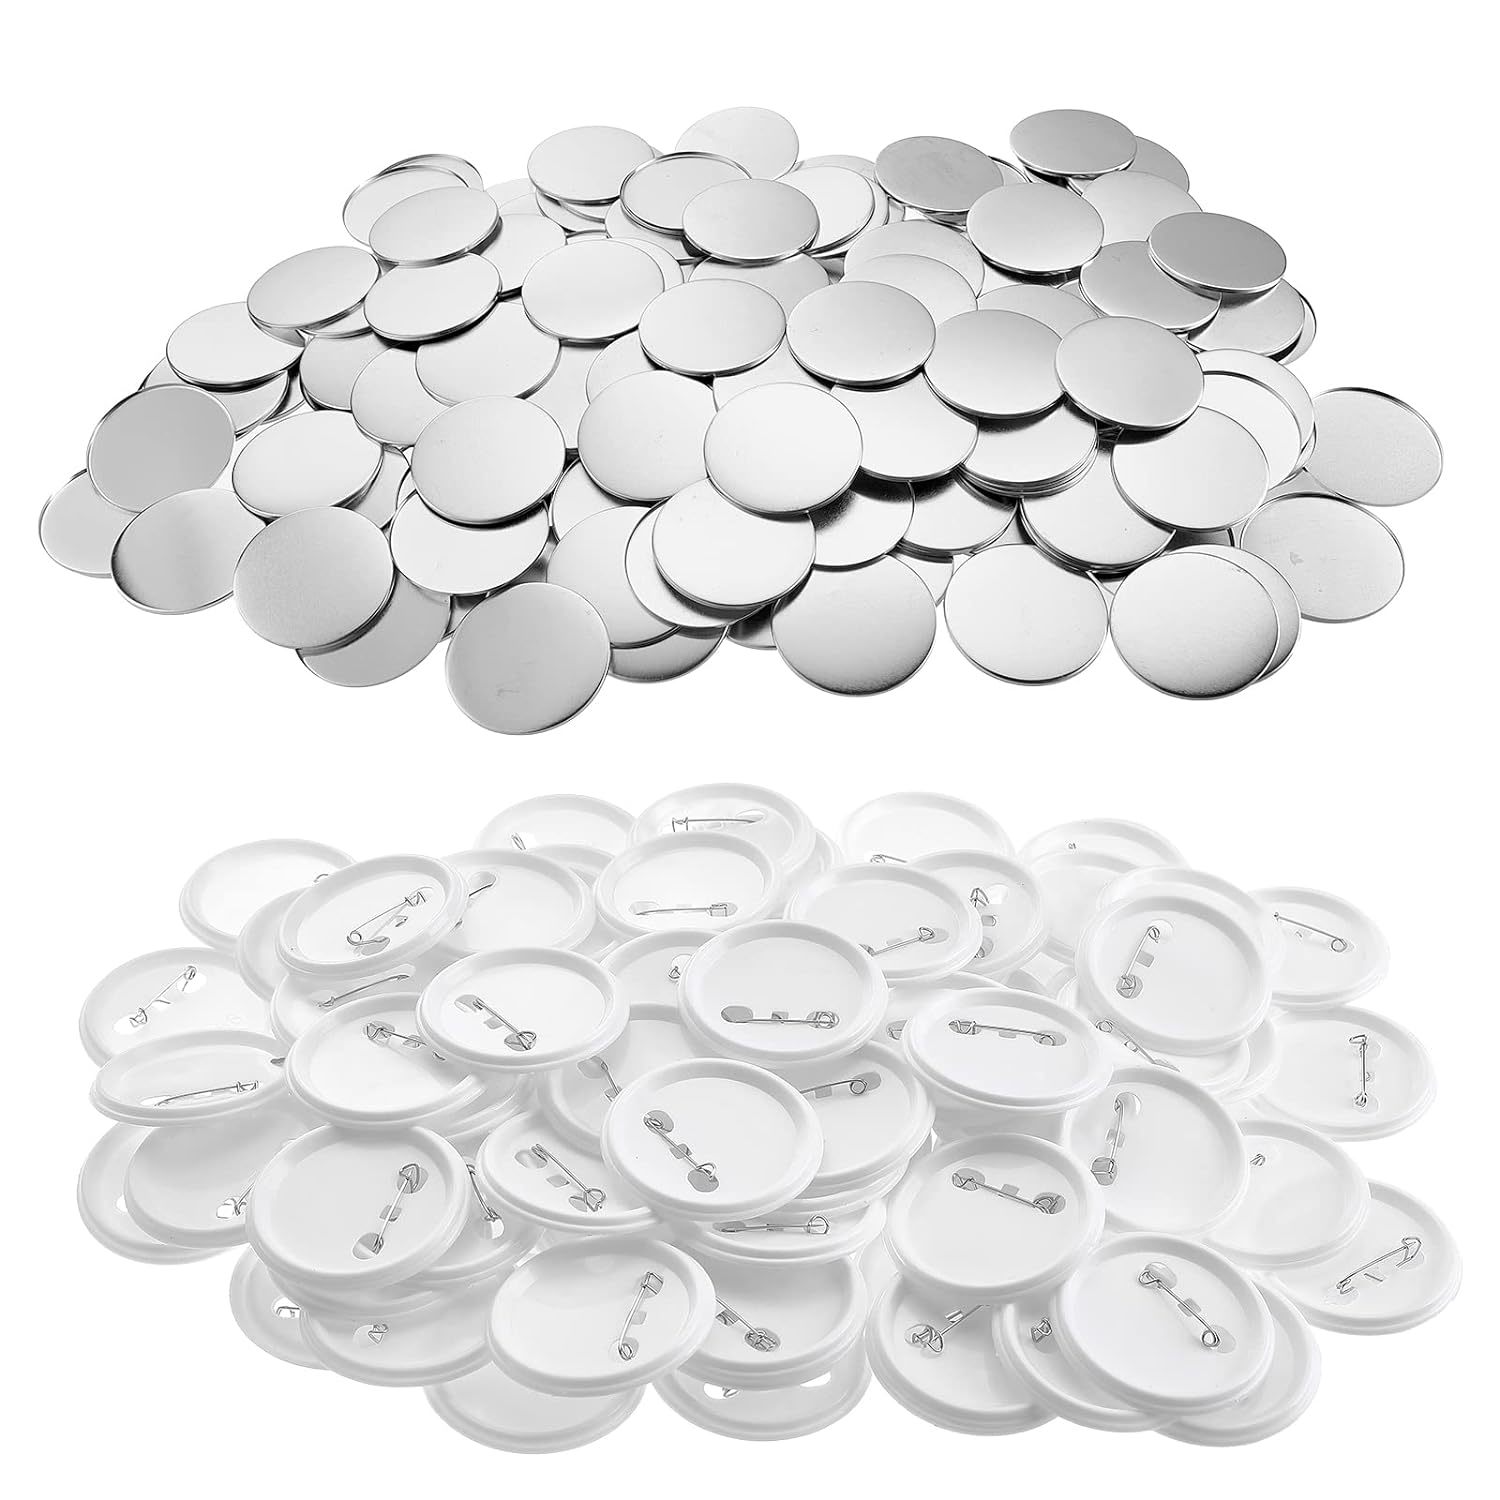 100 Sets Blank Button Making Supplies for Button Maker Machine Round Badge Pin Button Parts, 58mm/2.25 inch, Other